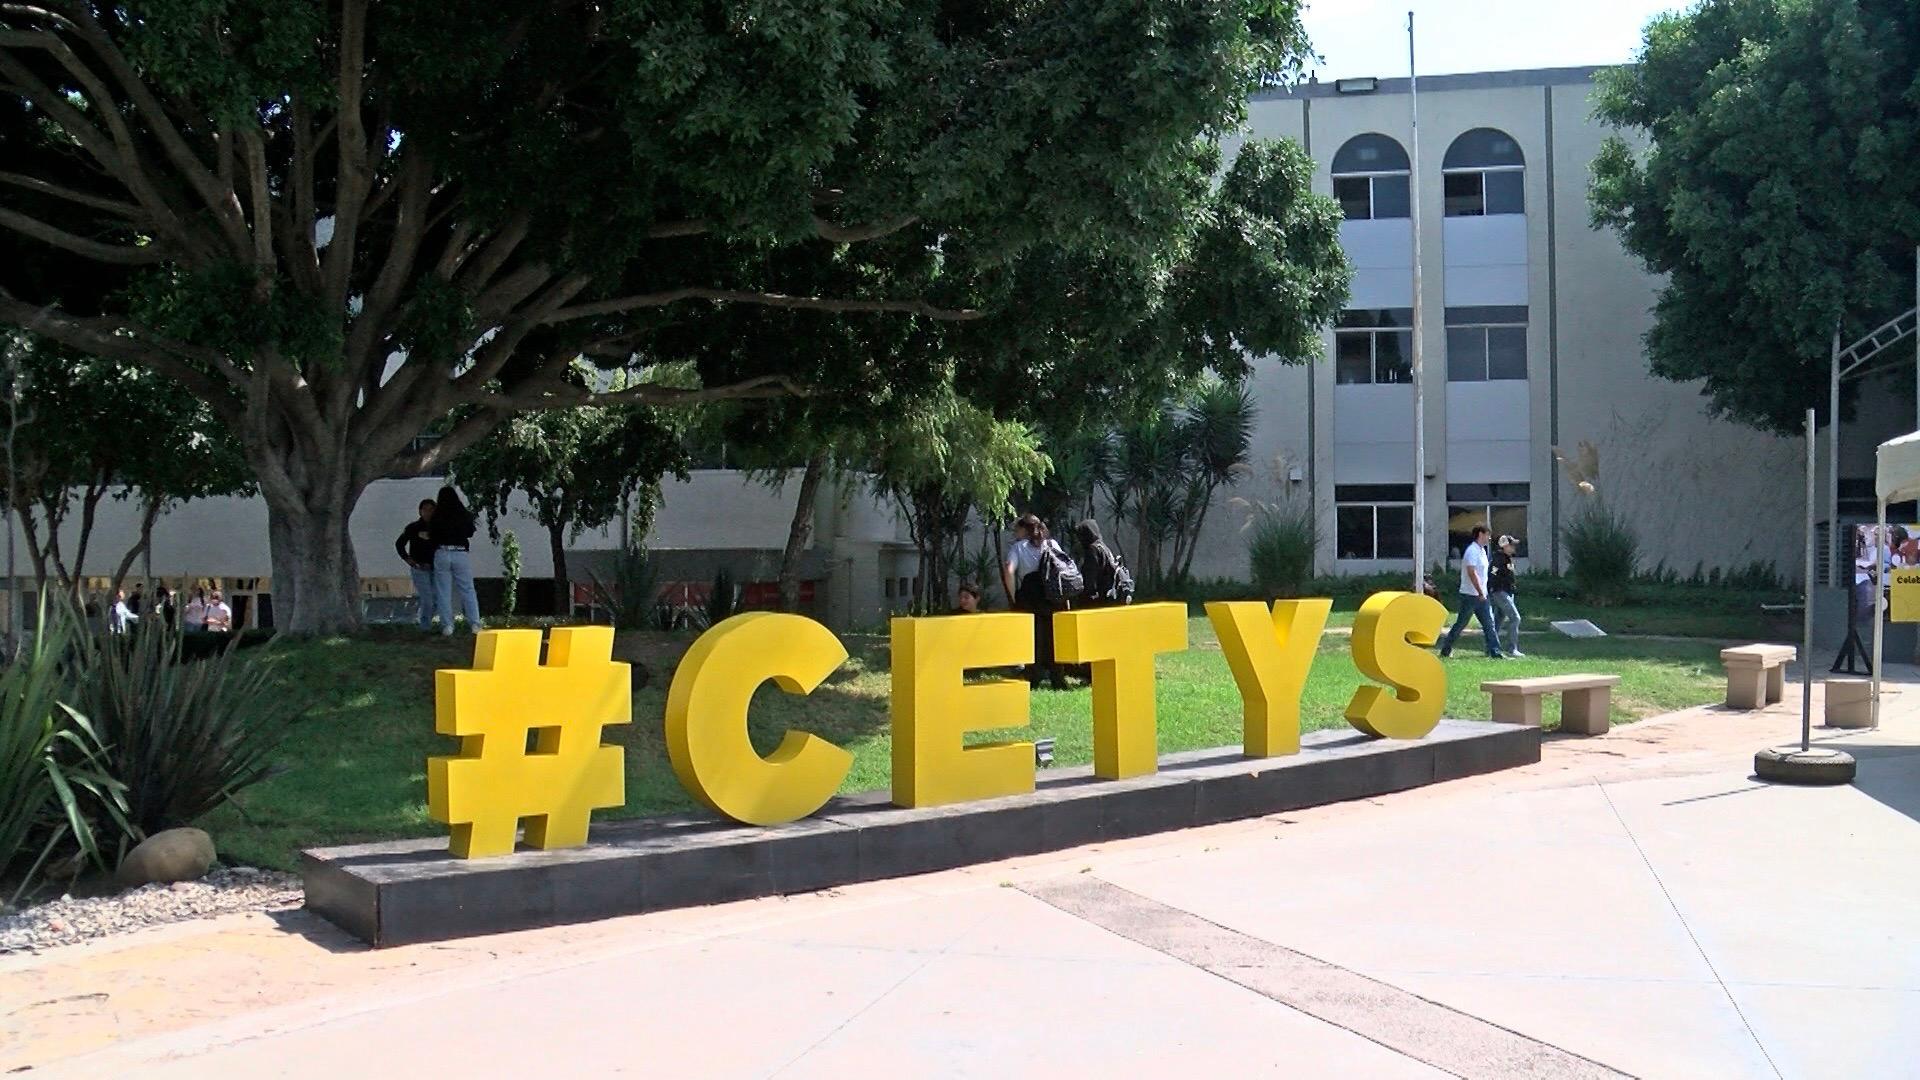 College campus with large yellow block letters that spell out C-E-T-Y-S